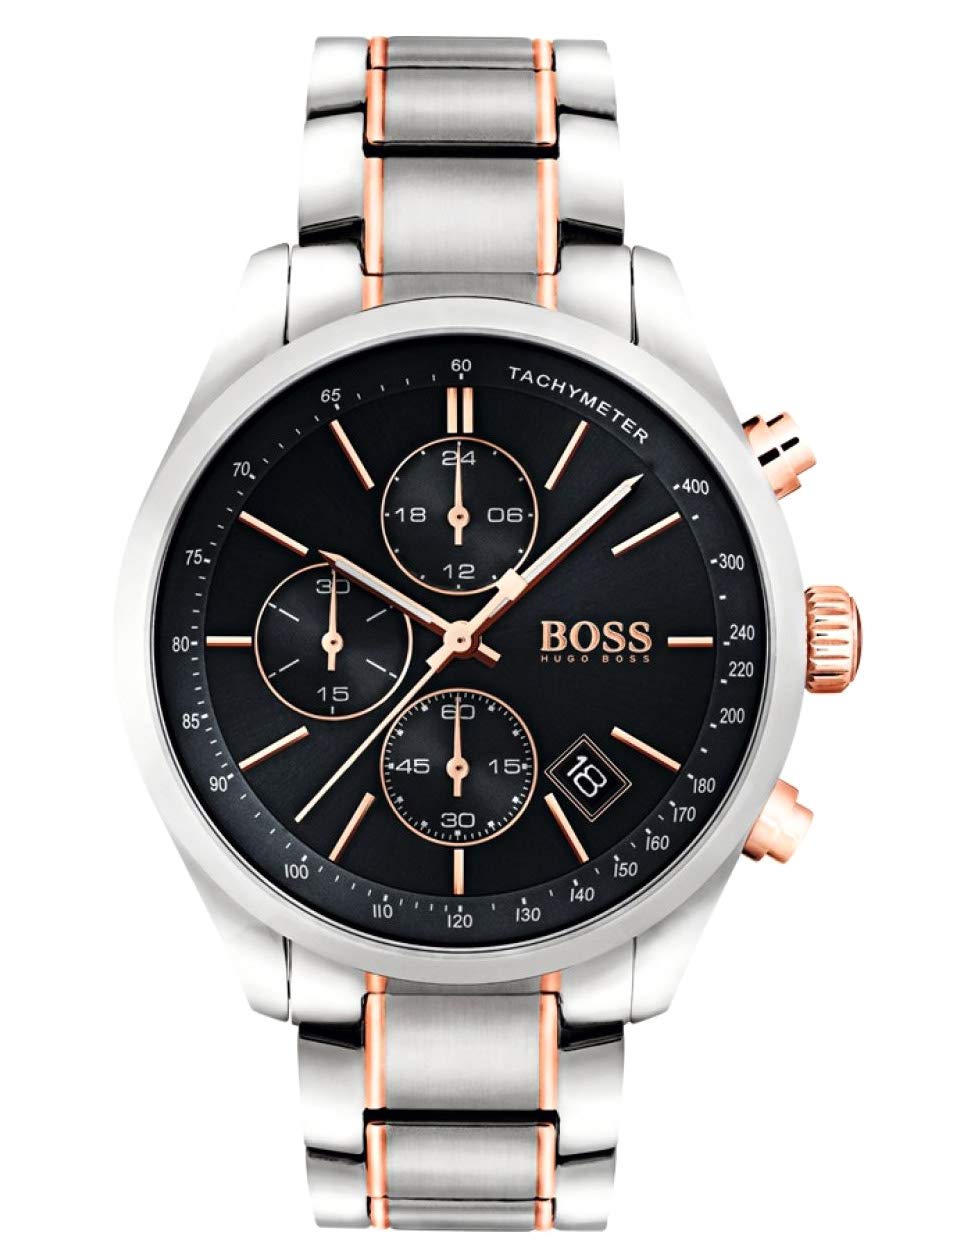 BOSS Men's Chronograph Quartz Watch with Stainless Steel Strap 1513473